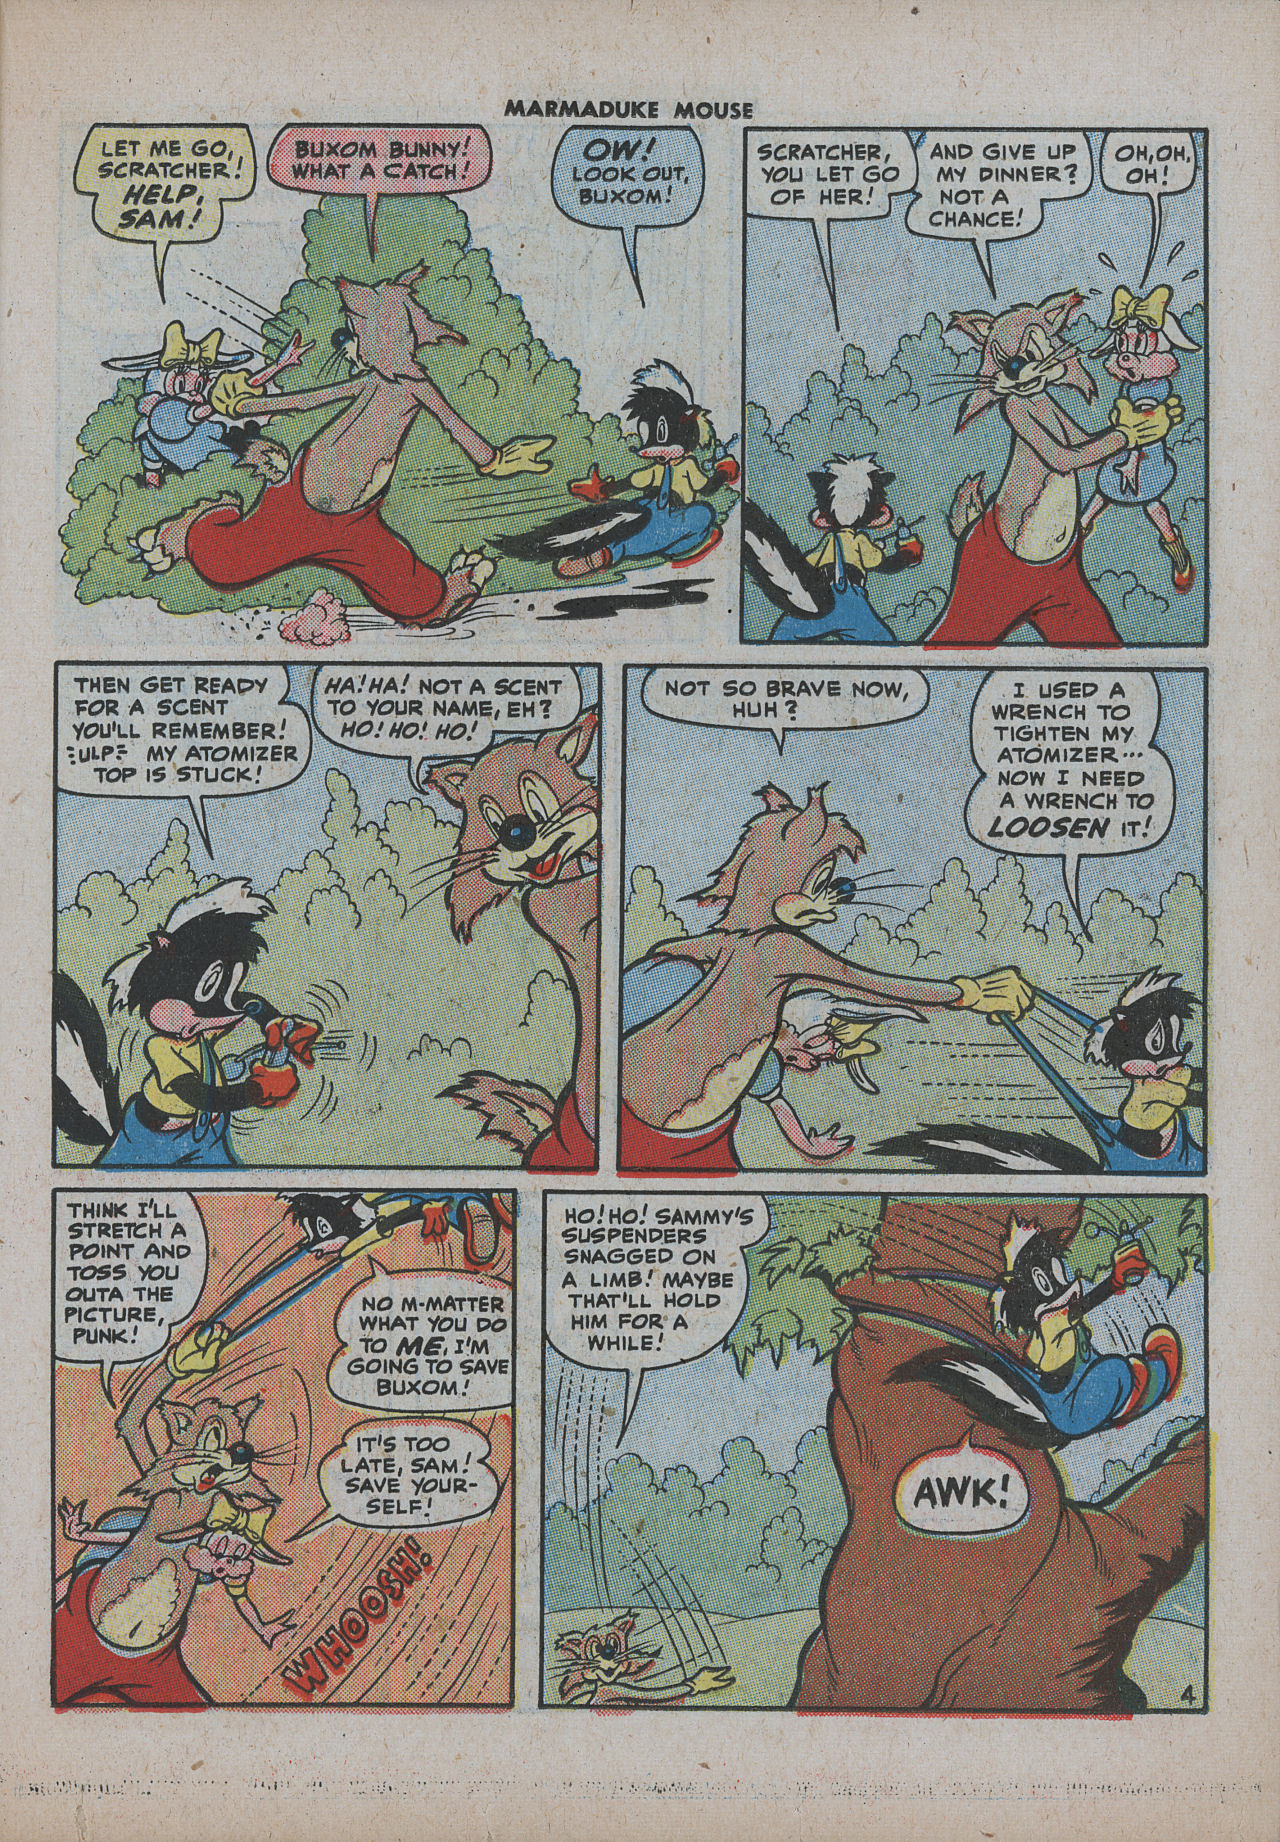 Read online Marmaduke Mouse comic -  Issue #5 - 23